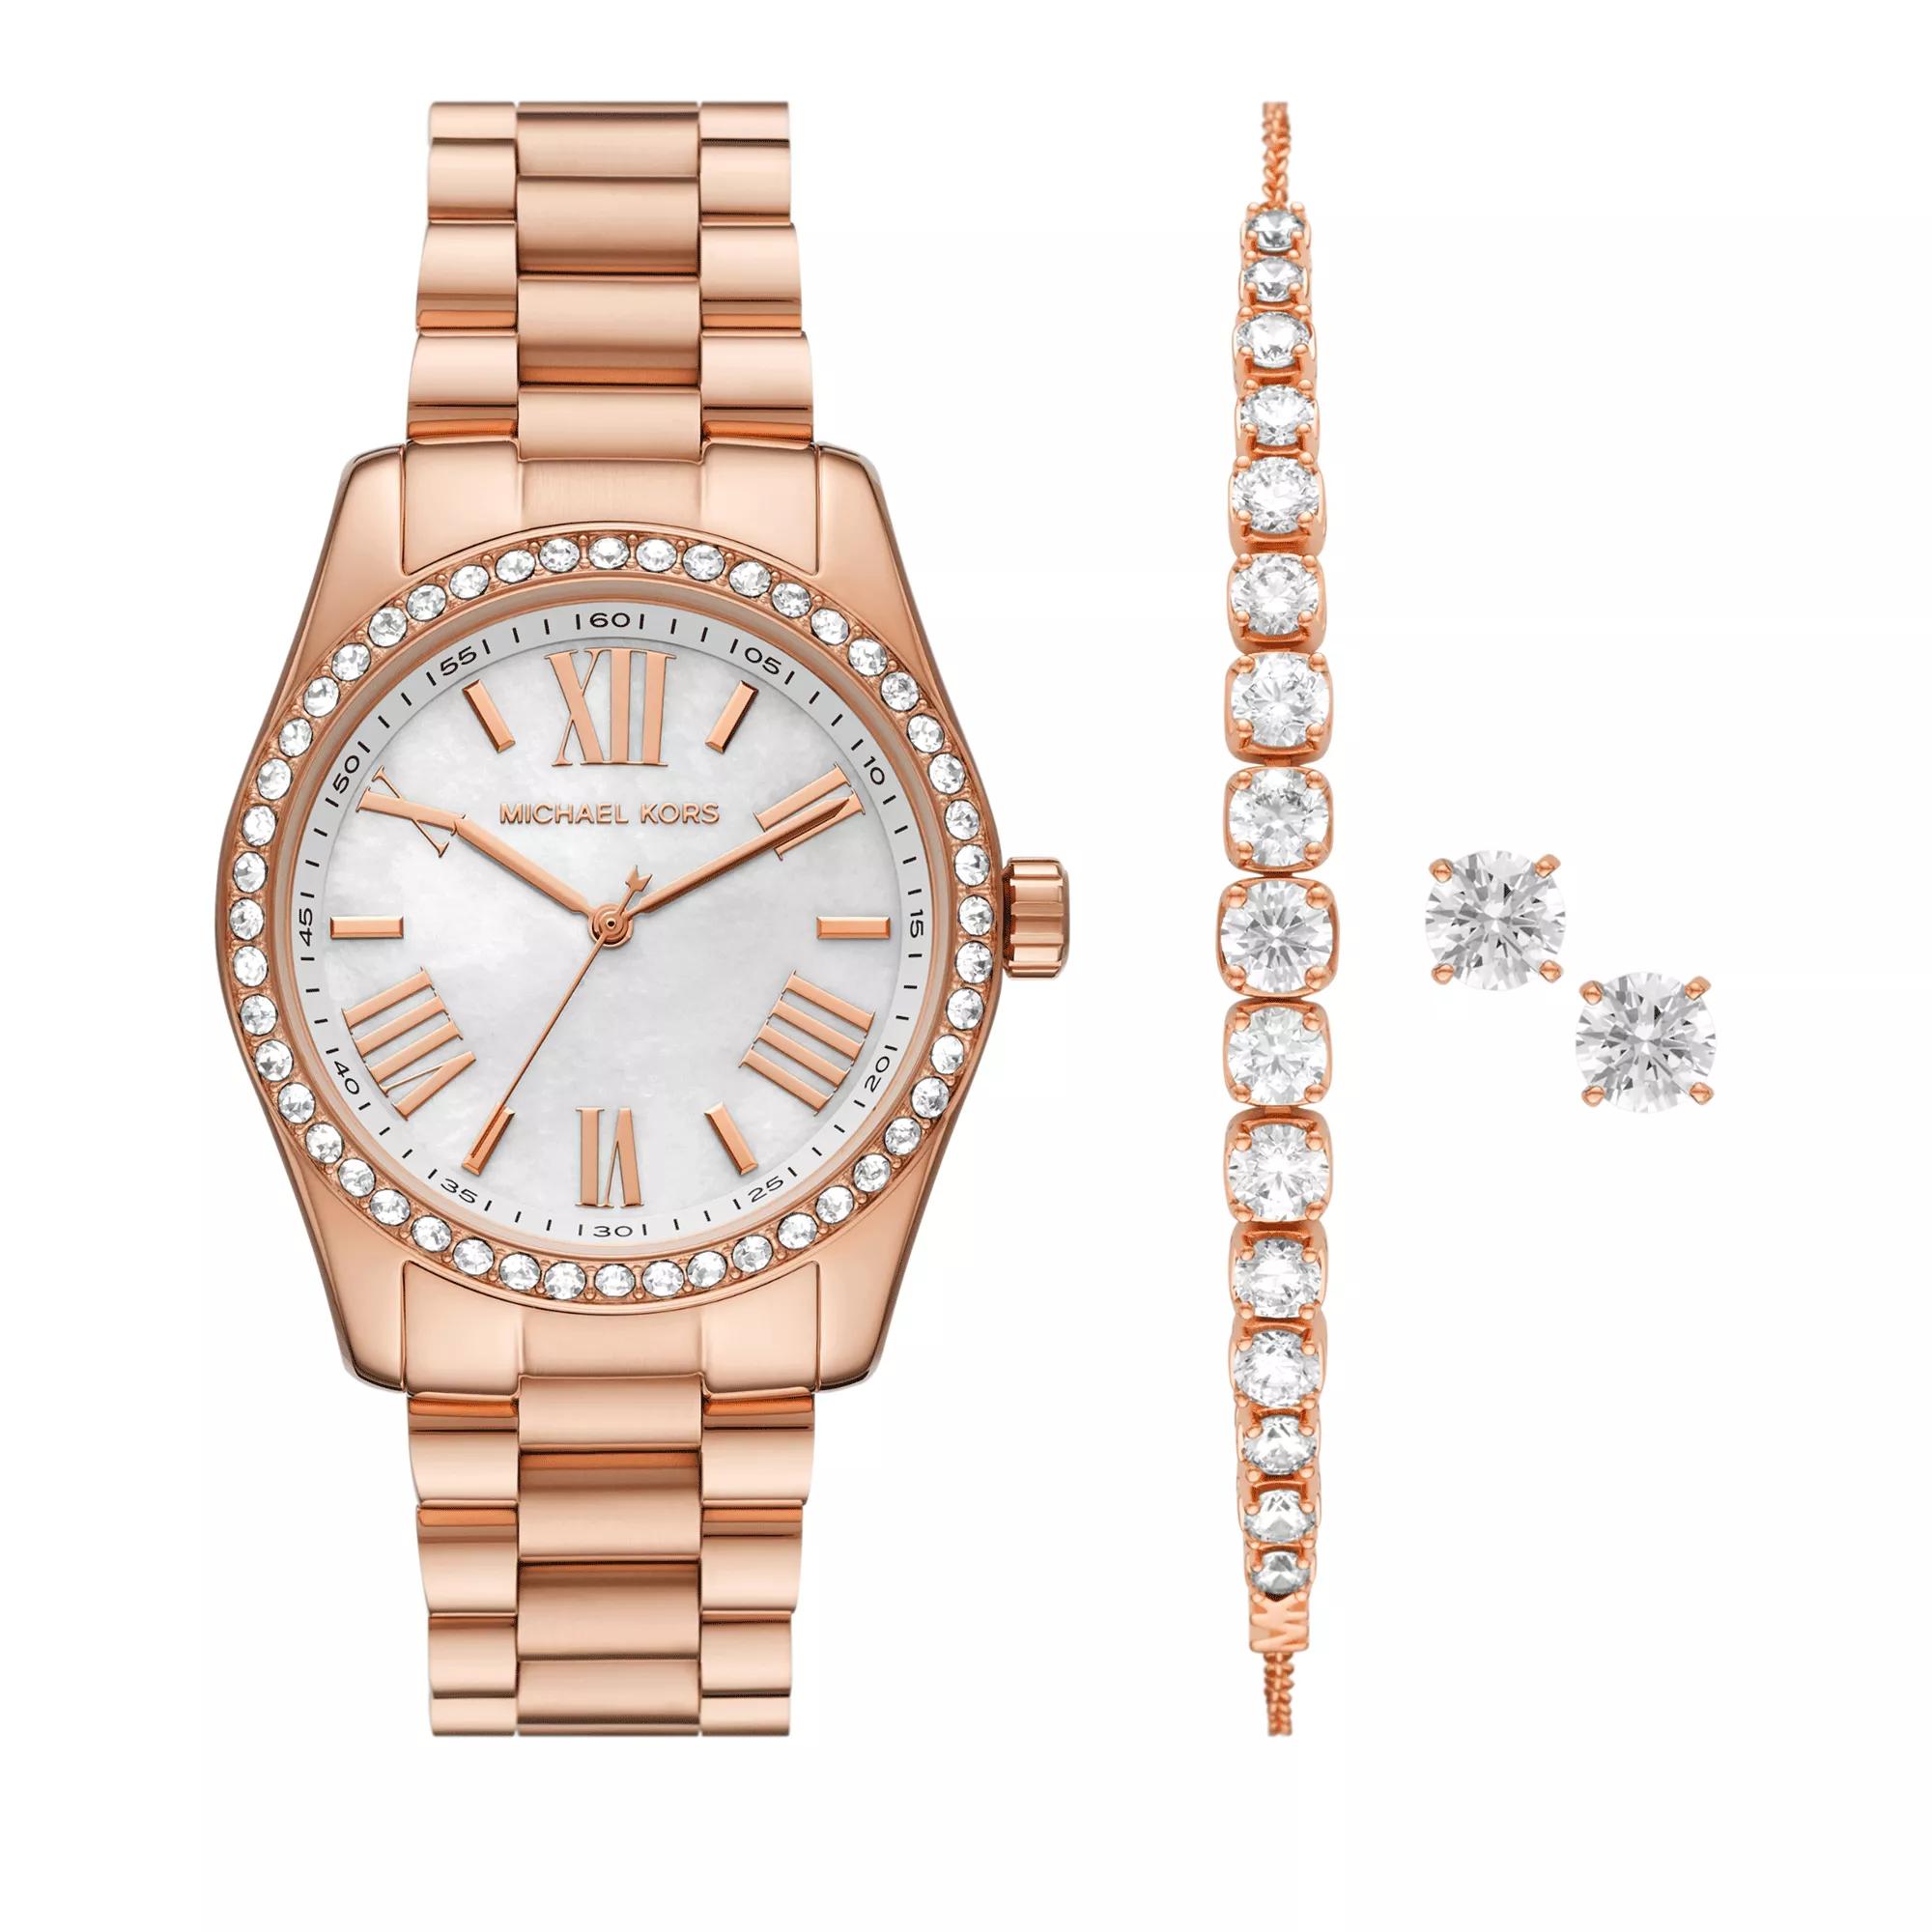 Michael Kors Lexington | Gold Jewellery and Rose Three-Hand Stainless Quarz-Uhr Watch Steel